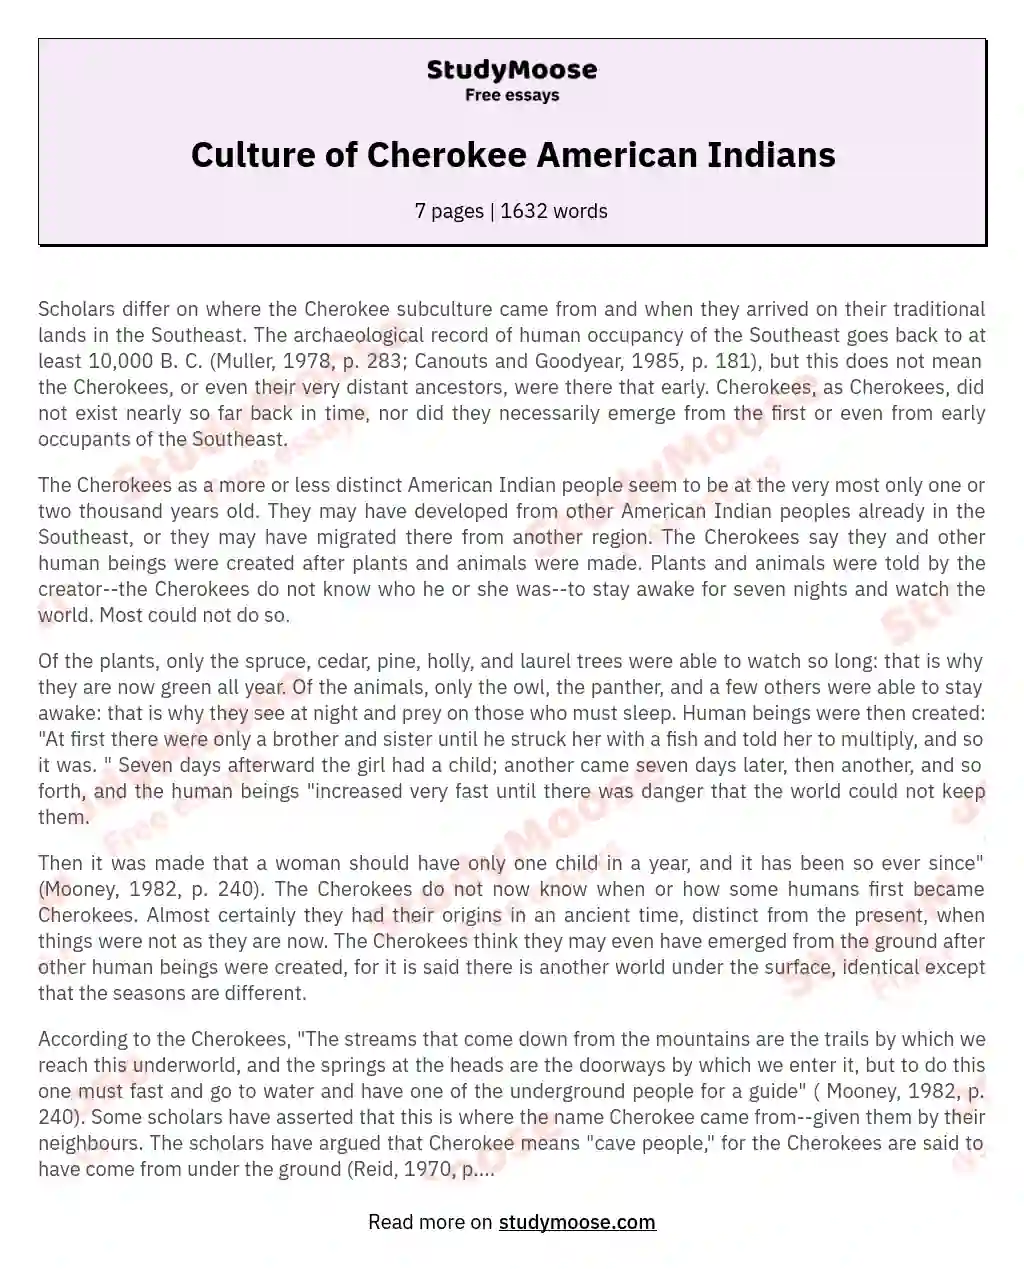 Culture of Cherokee American Indians